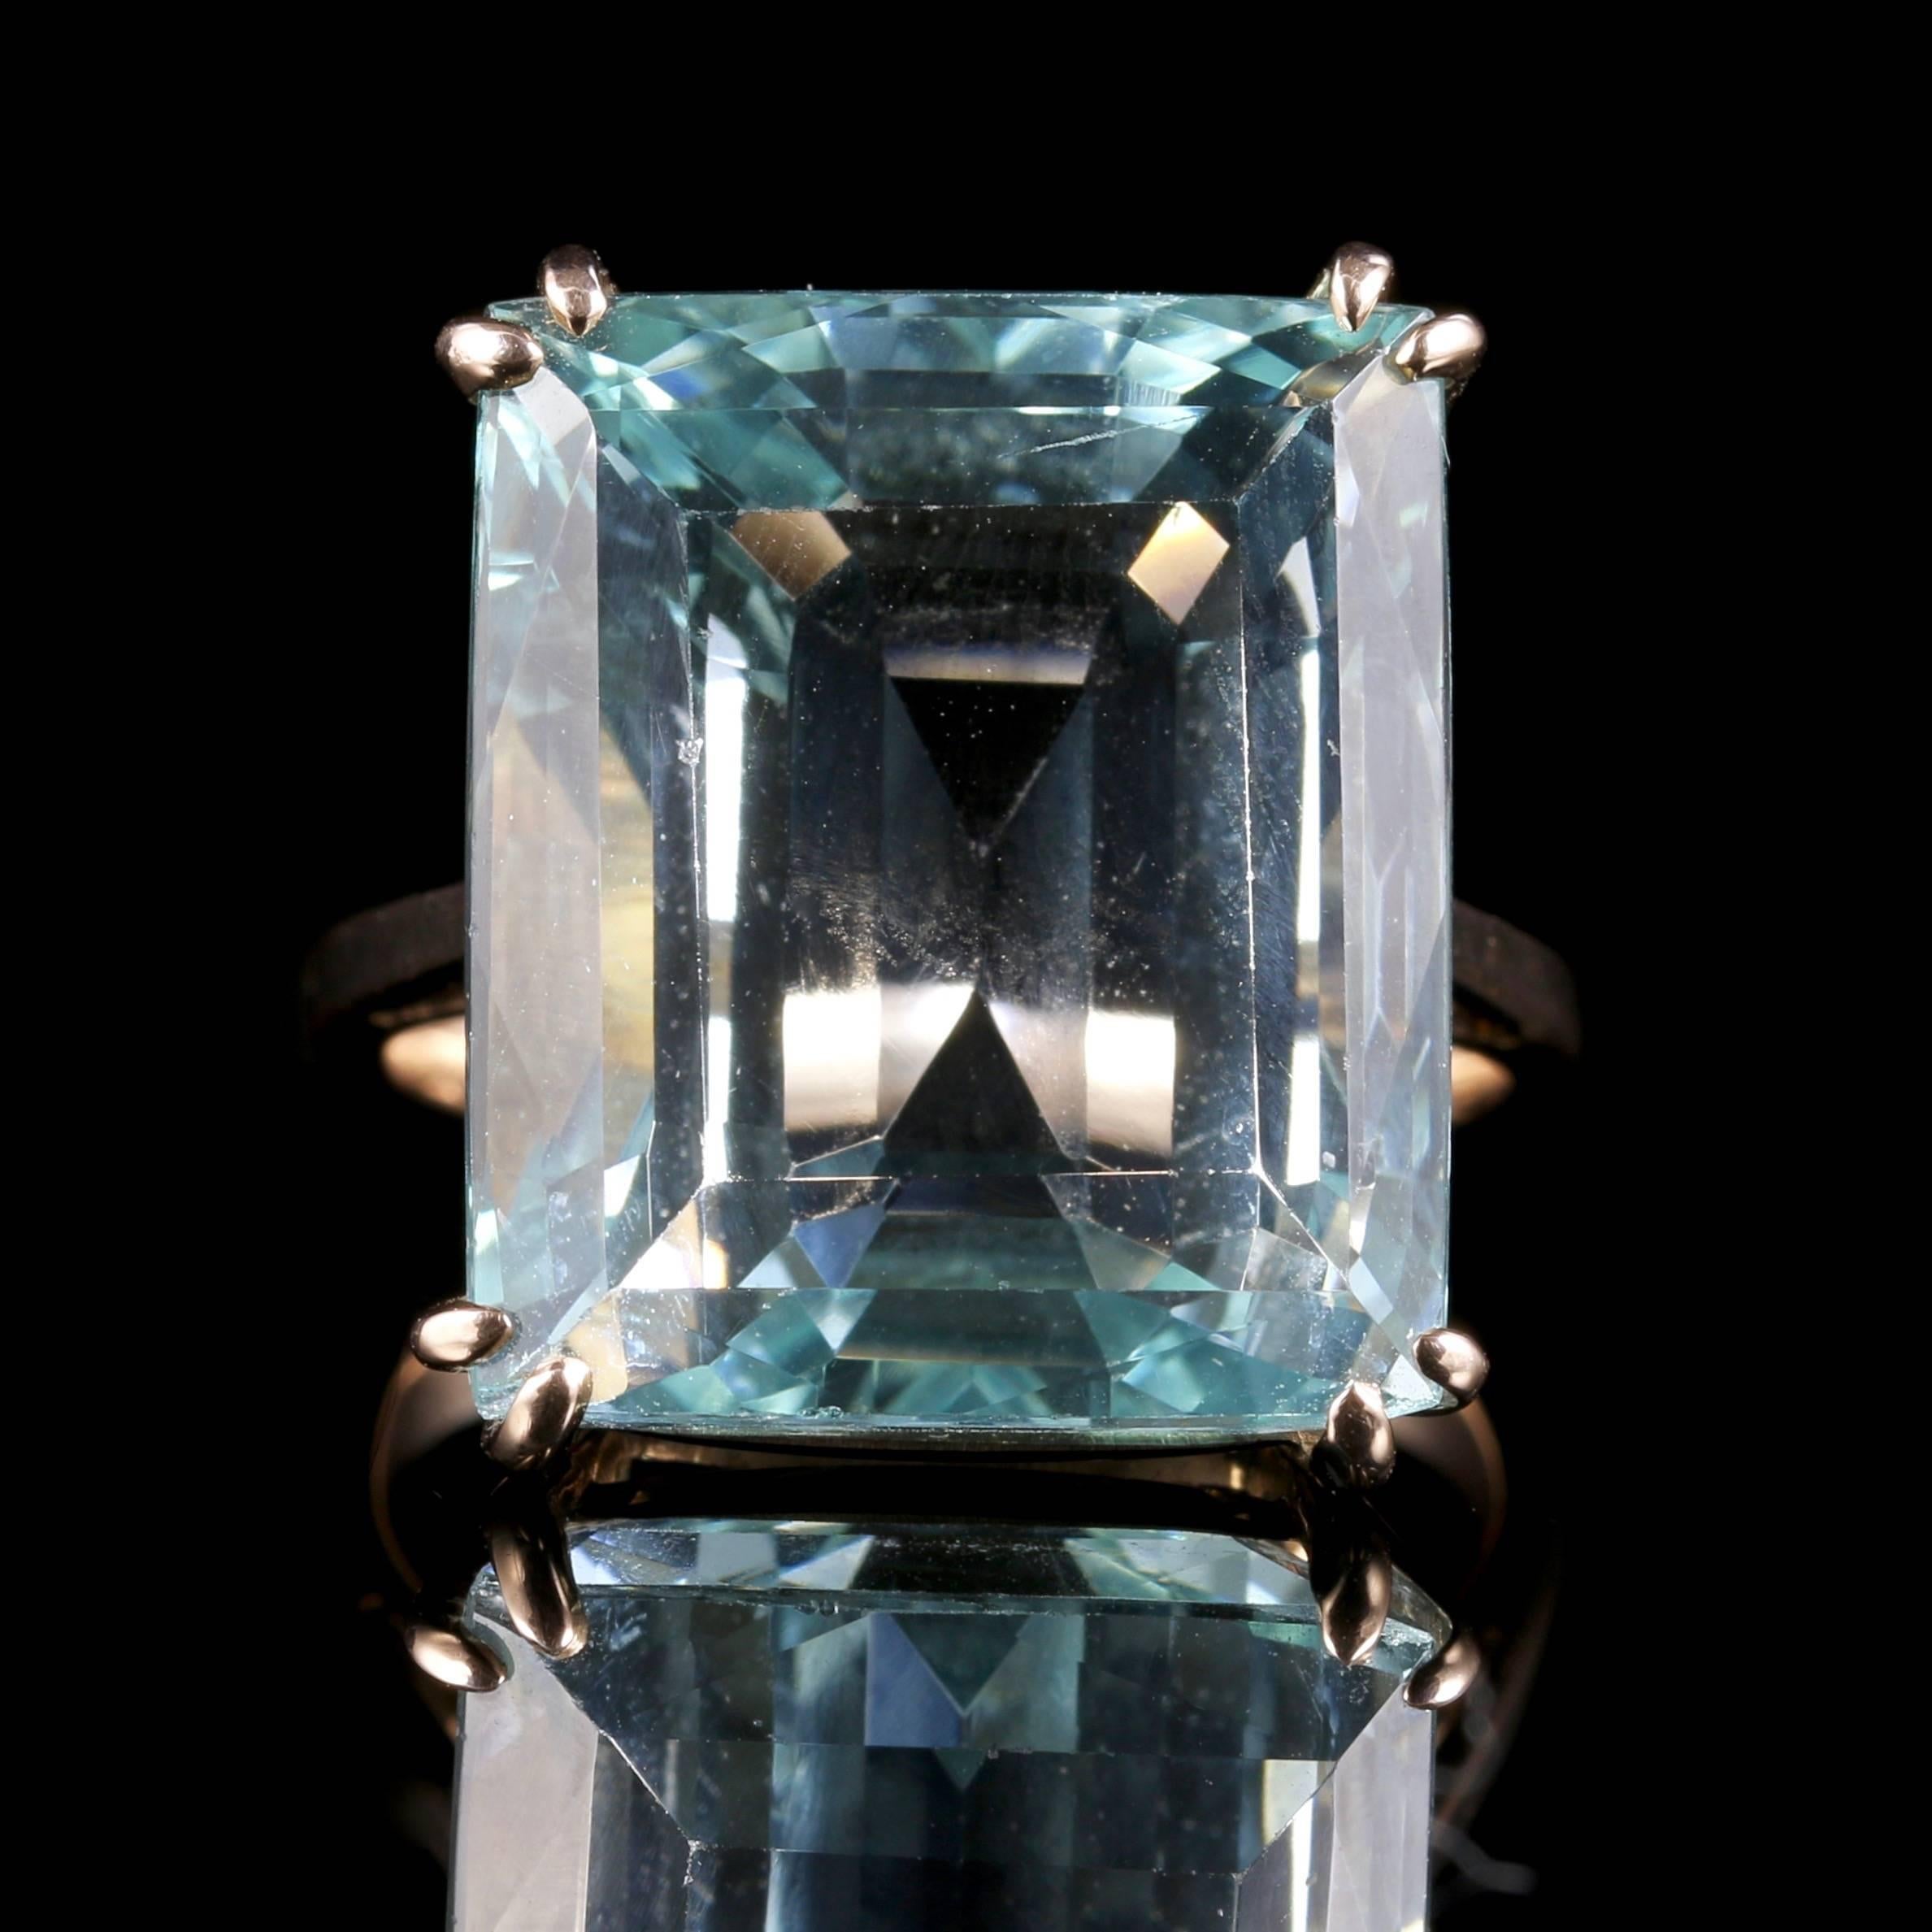 This is a fabulous 15ct yellow gold ring which boasts a 30ct Aquamarine that is Emerald Cut. 

It has the most desirable ocean blue hue which is sought after within the world of Aquamarines. 

The lovely Emerald Cut has beautiful high faceted edges